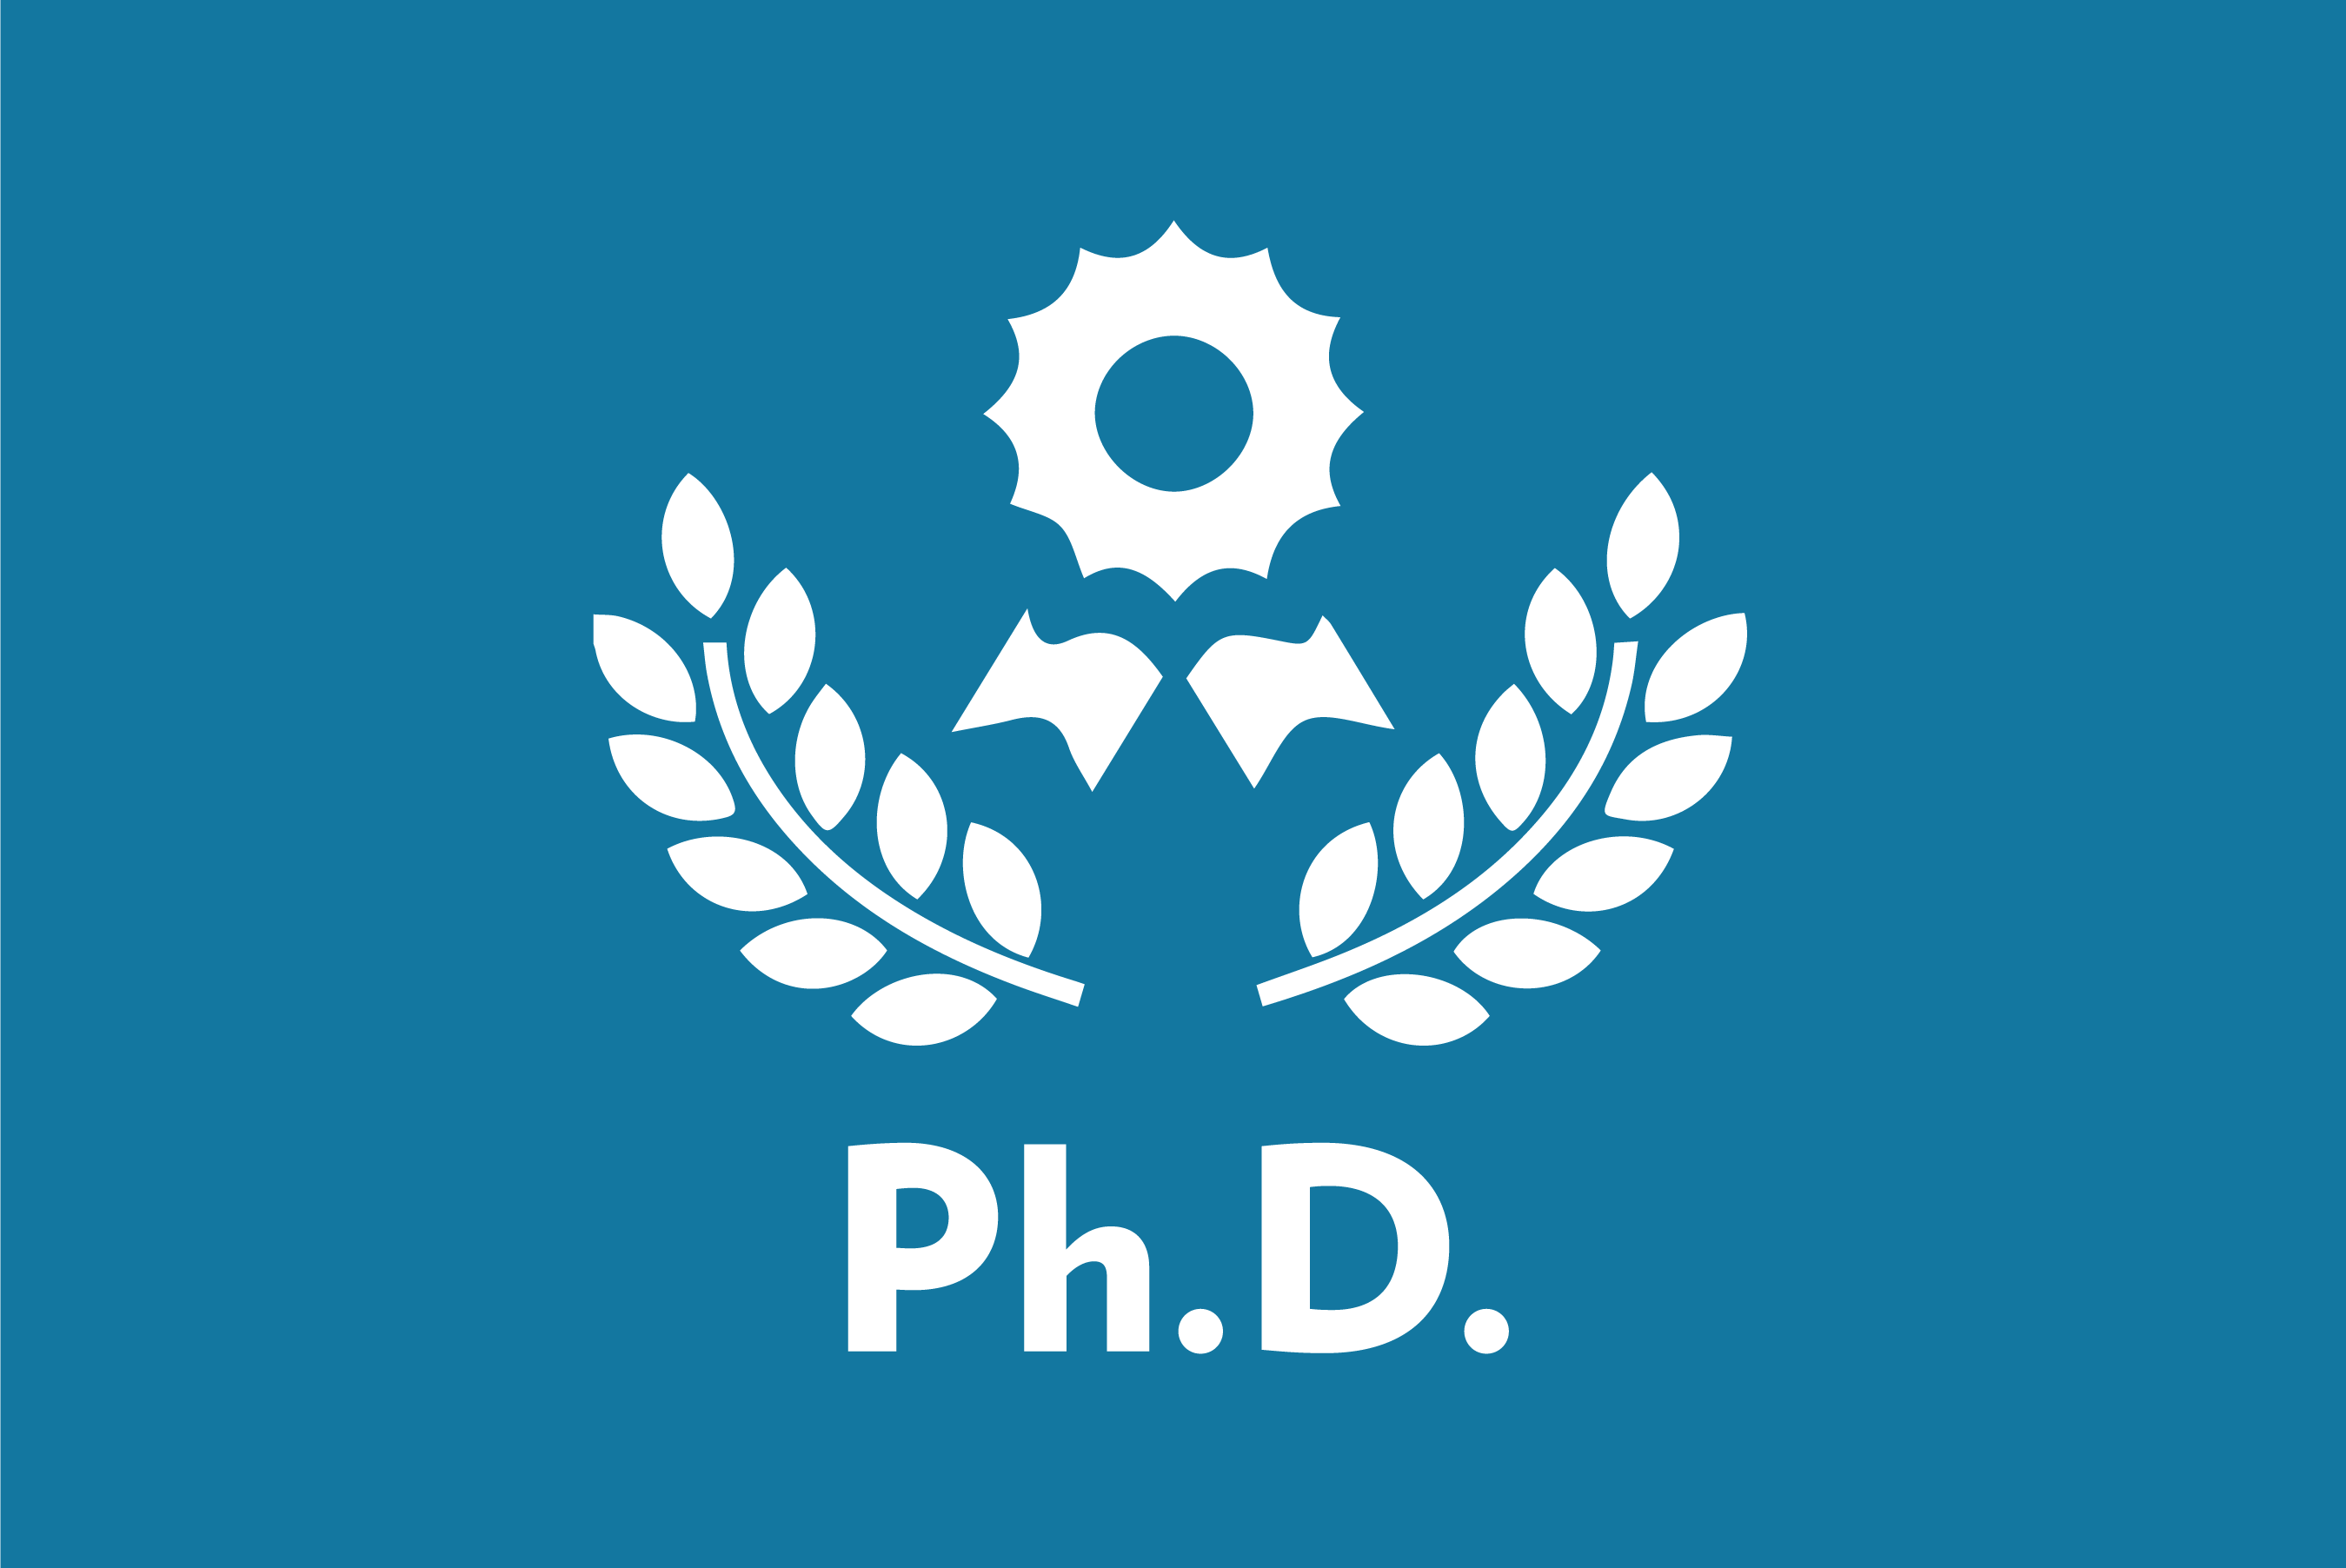 PhD doctor of philosophy icon